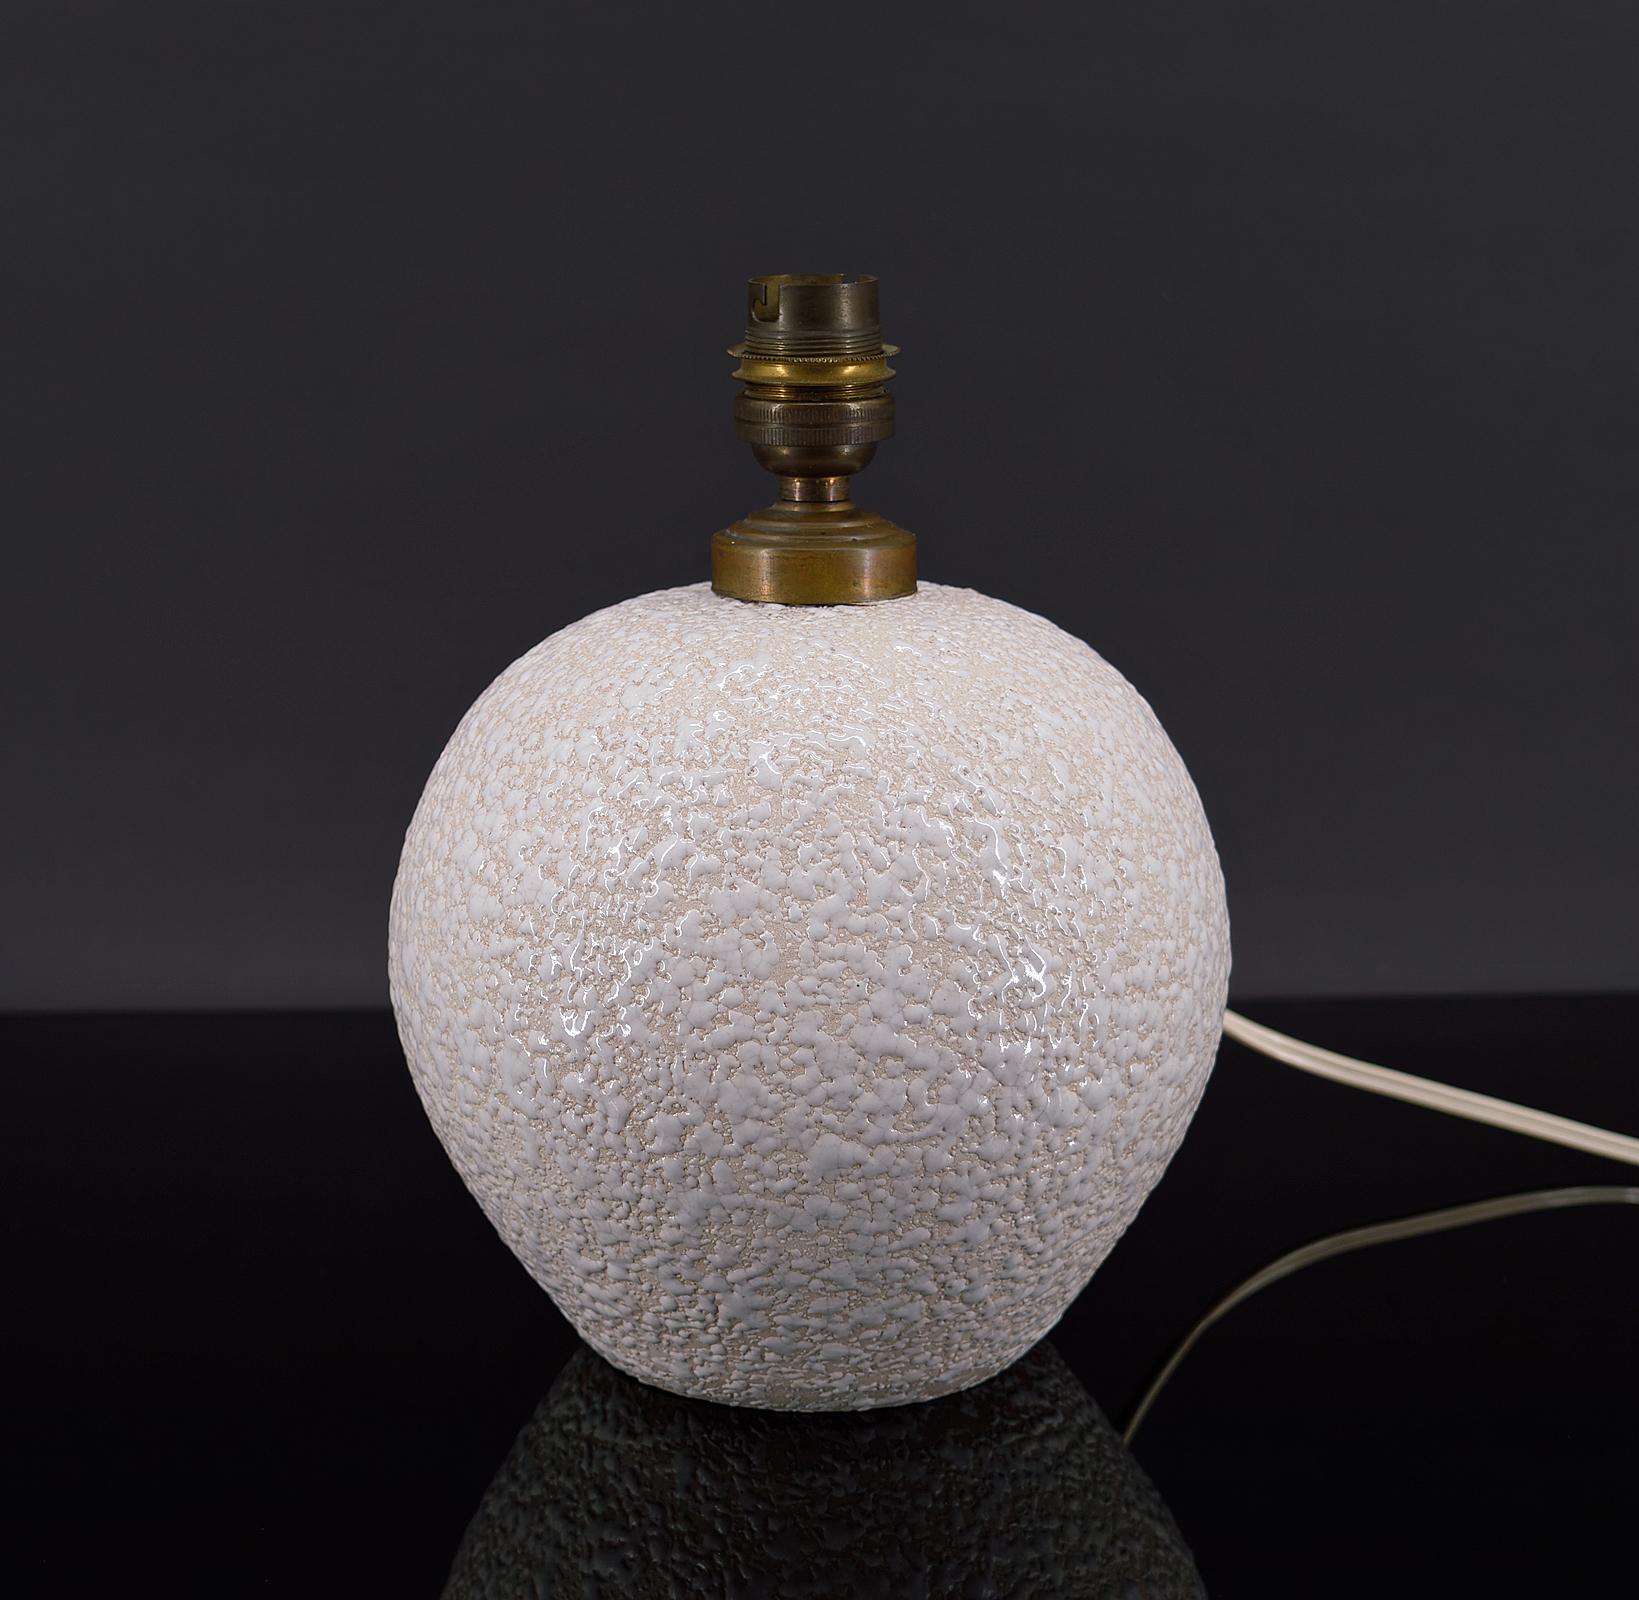 Elegant enameled ceramic ball table lamp.
Spherical shape, with white enamel on a light cream background.

Art Deco, France, around 1930.
In the style of the productions of Jean Besnard. 

In good condition, electricity checked.

Dimensions :
Height